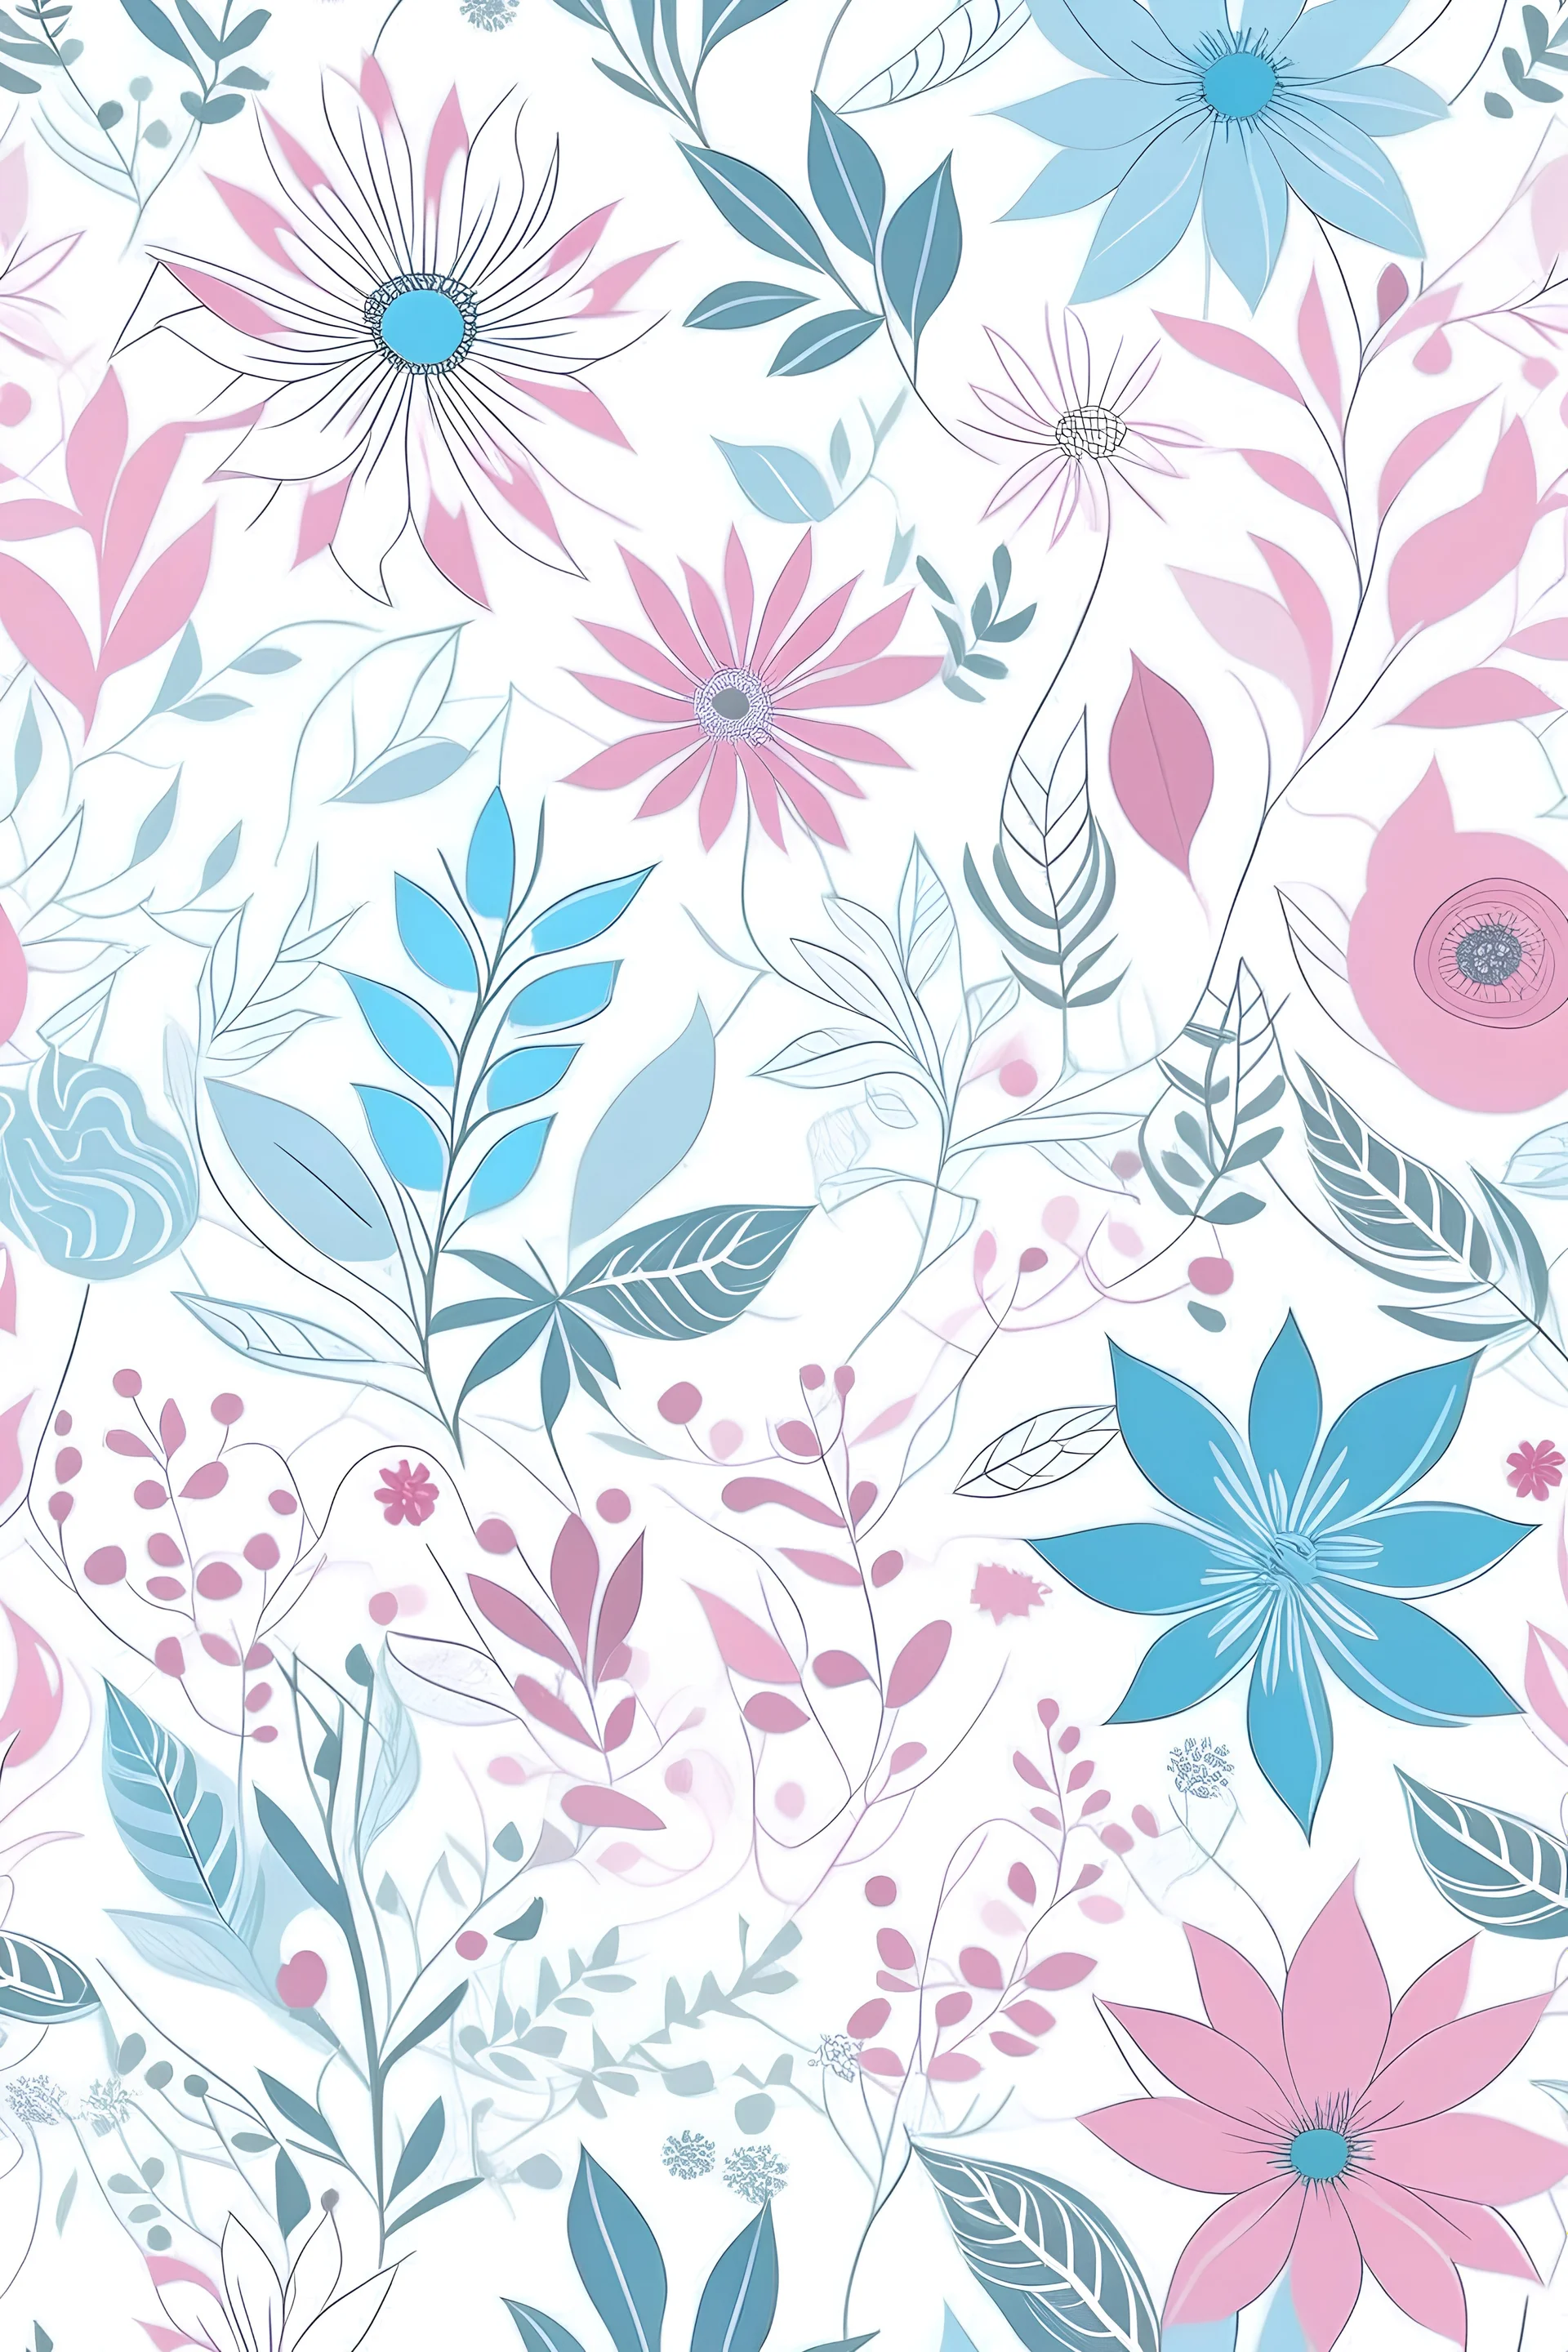 flowers and leaves in a field design pattern featuring pink, light blue and silver on a white background